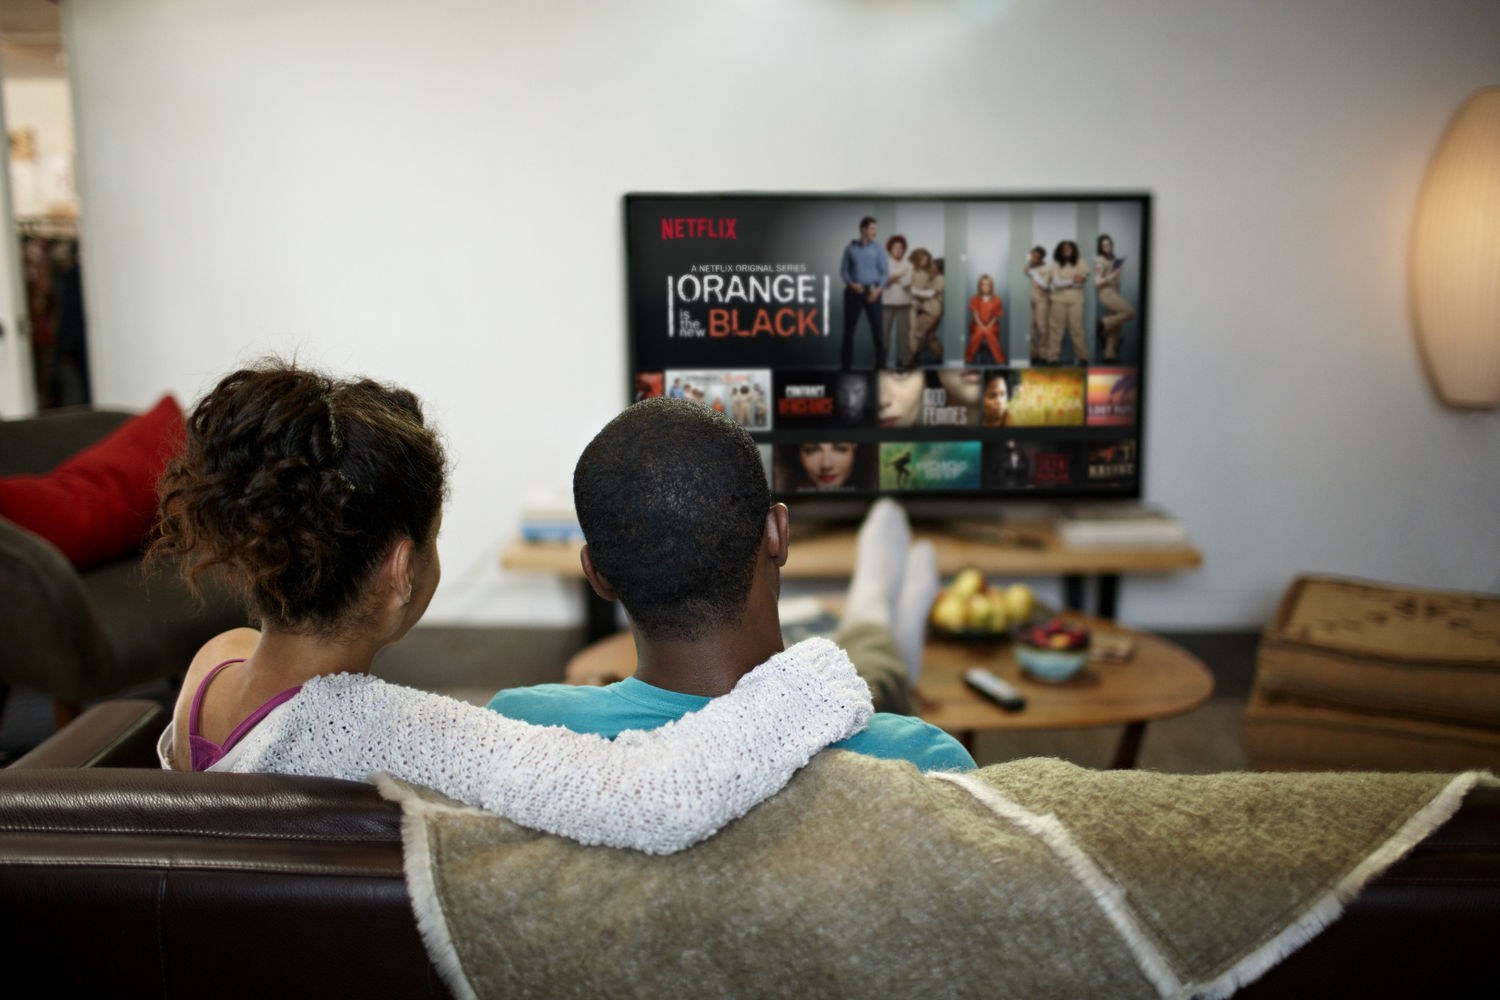 66% of Colombians admit to canceling plans to stay watching TV at home